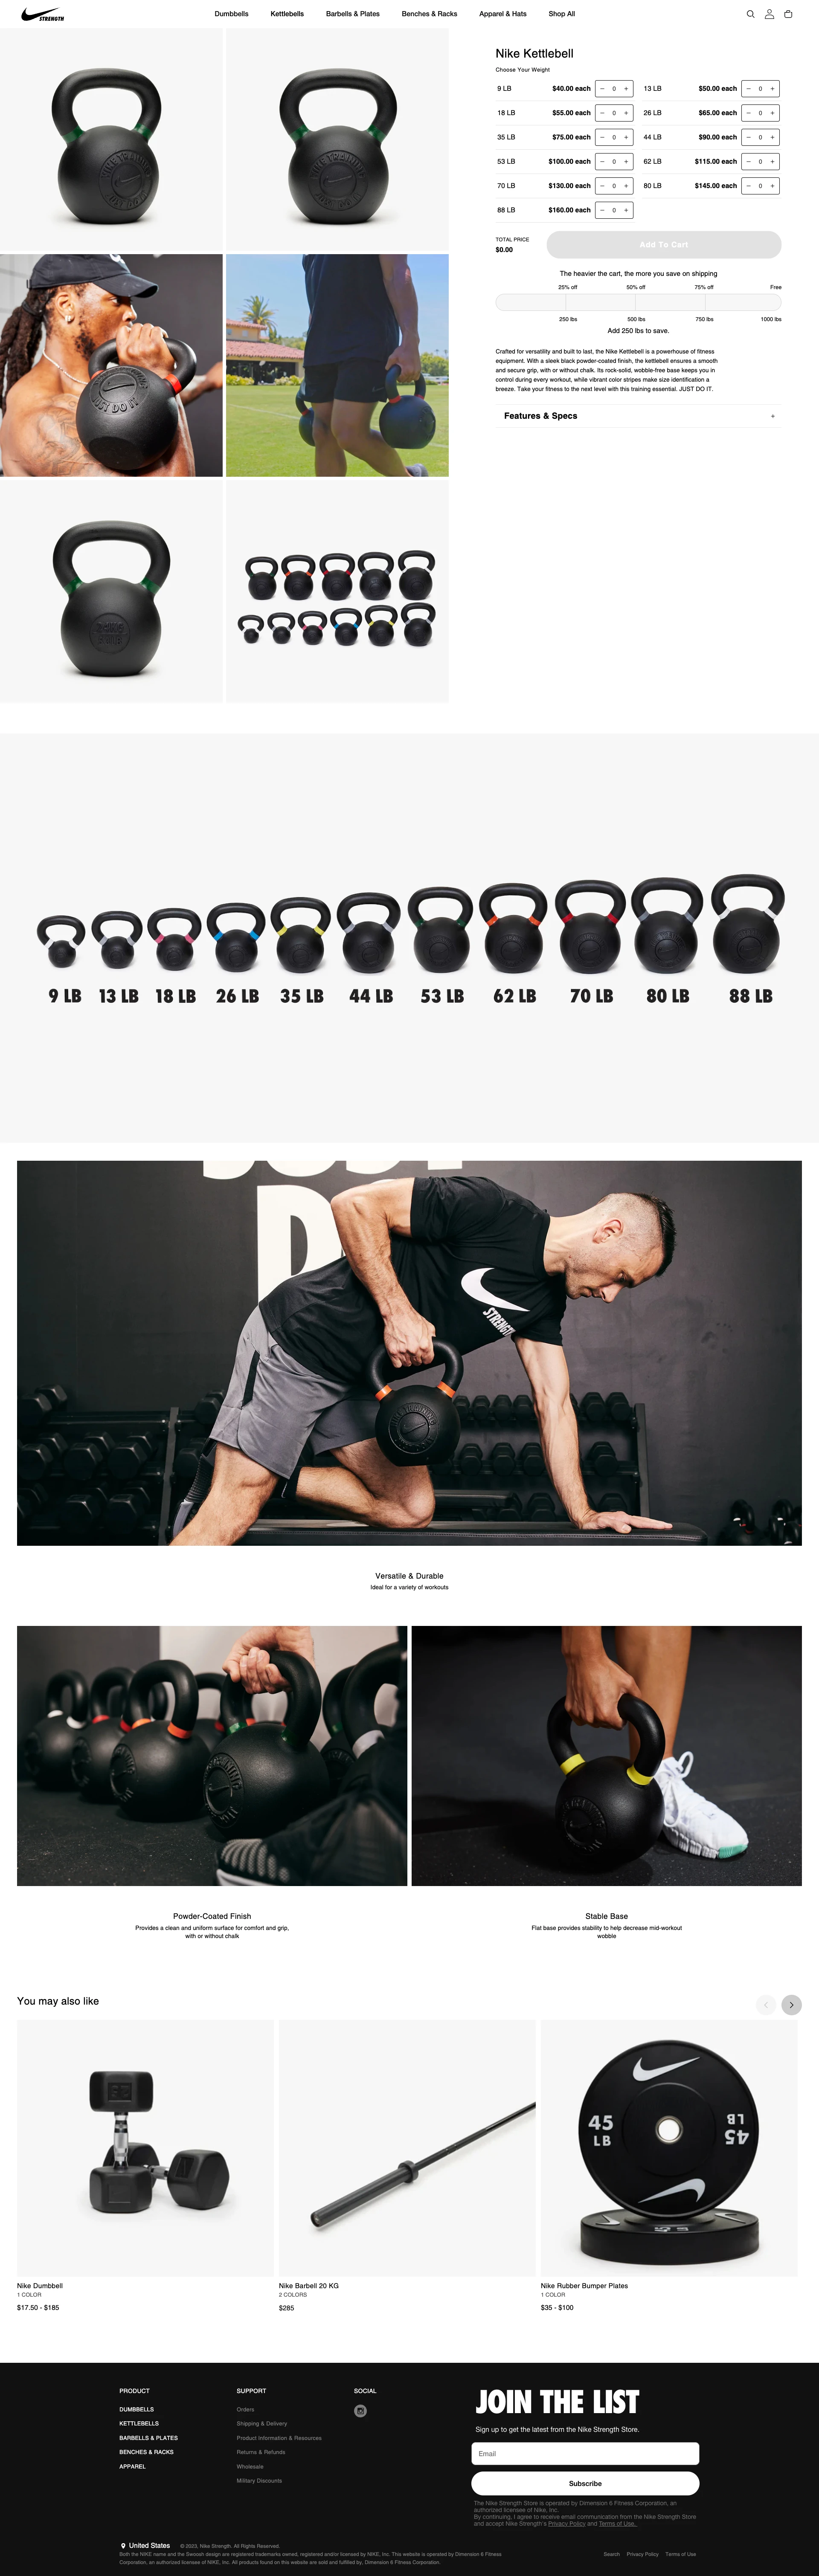 Nike Strength Landing Page Example: Elevate your training. Home gym equipment for all athletes. Dumbbells, Kettlebells, Barbells & Plates, Benches & Racks, Apparel & Hats. Proven and tested by championship athletes.